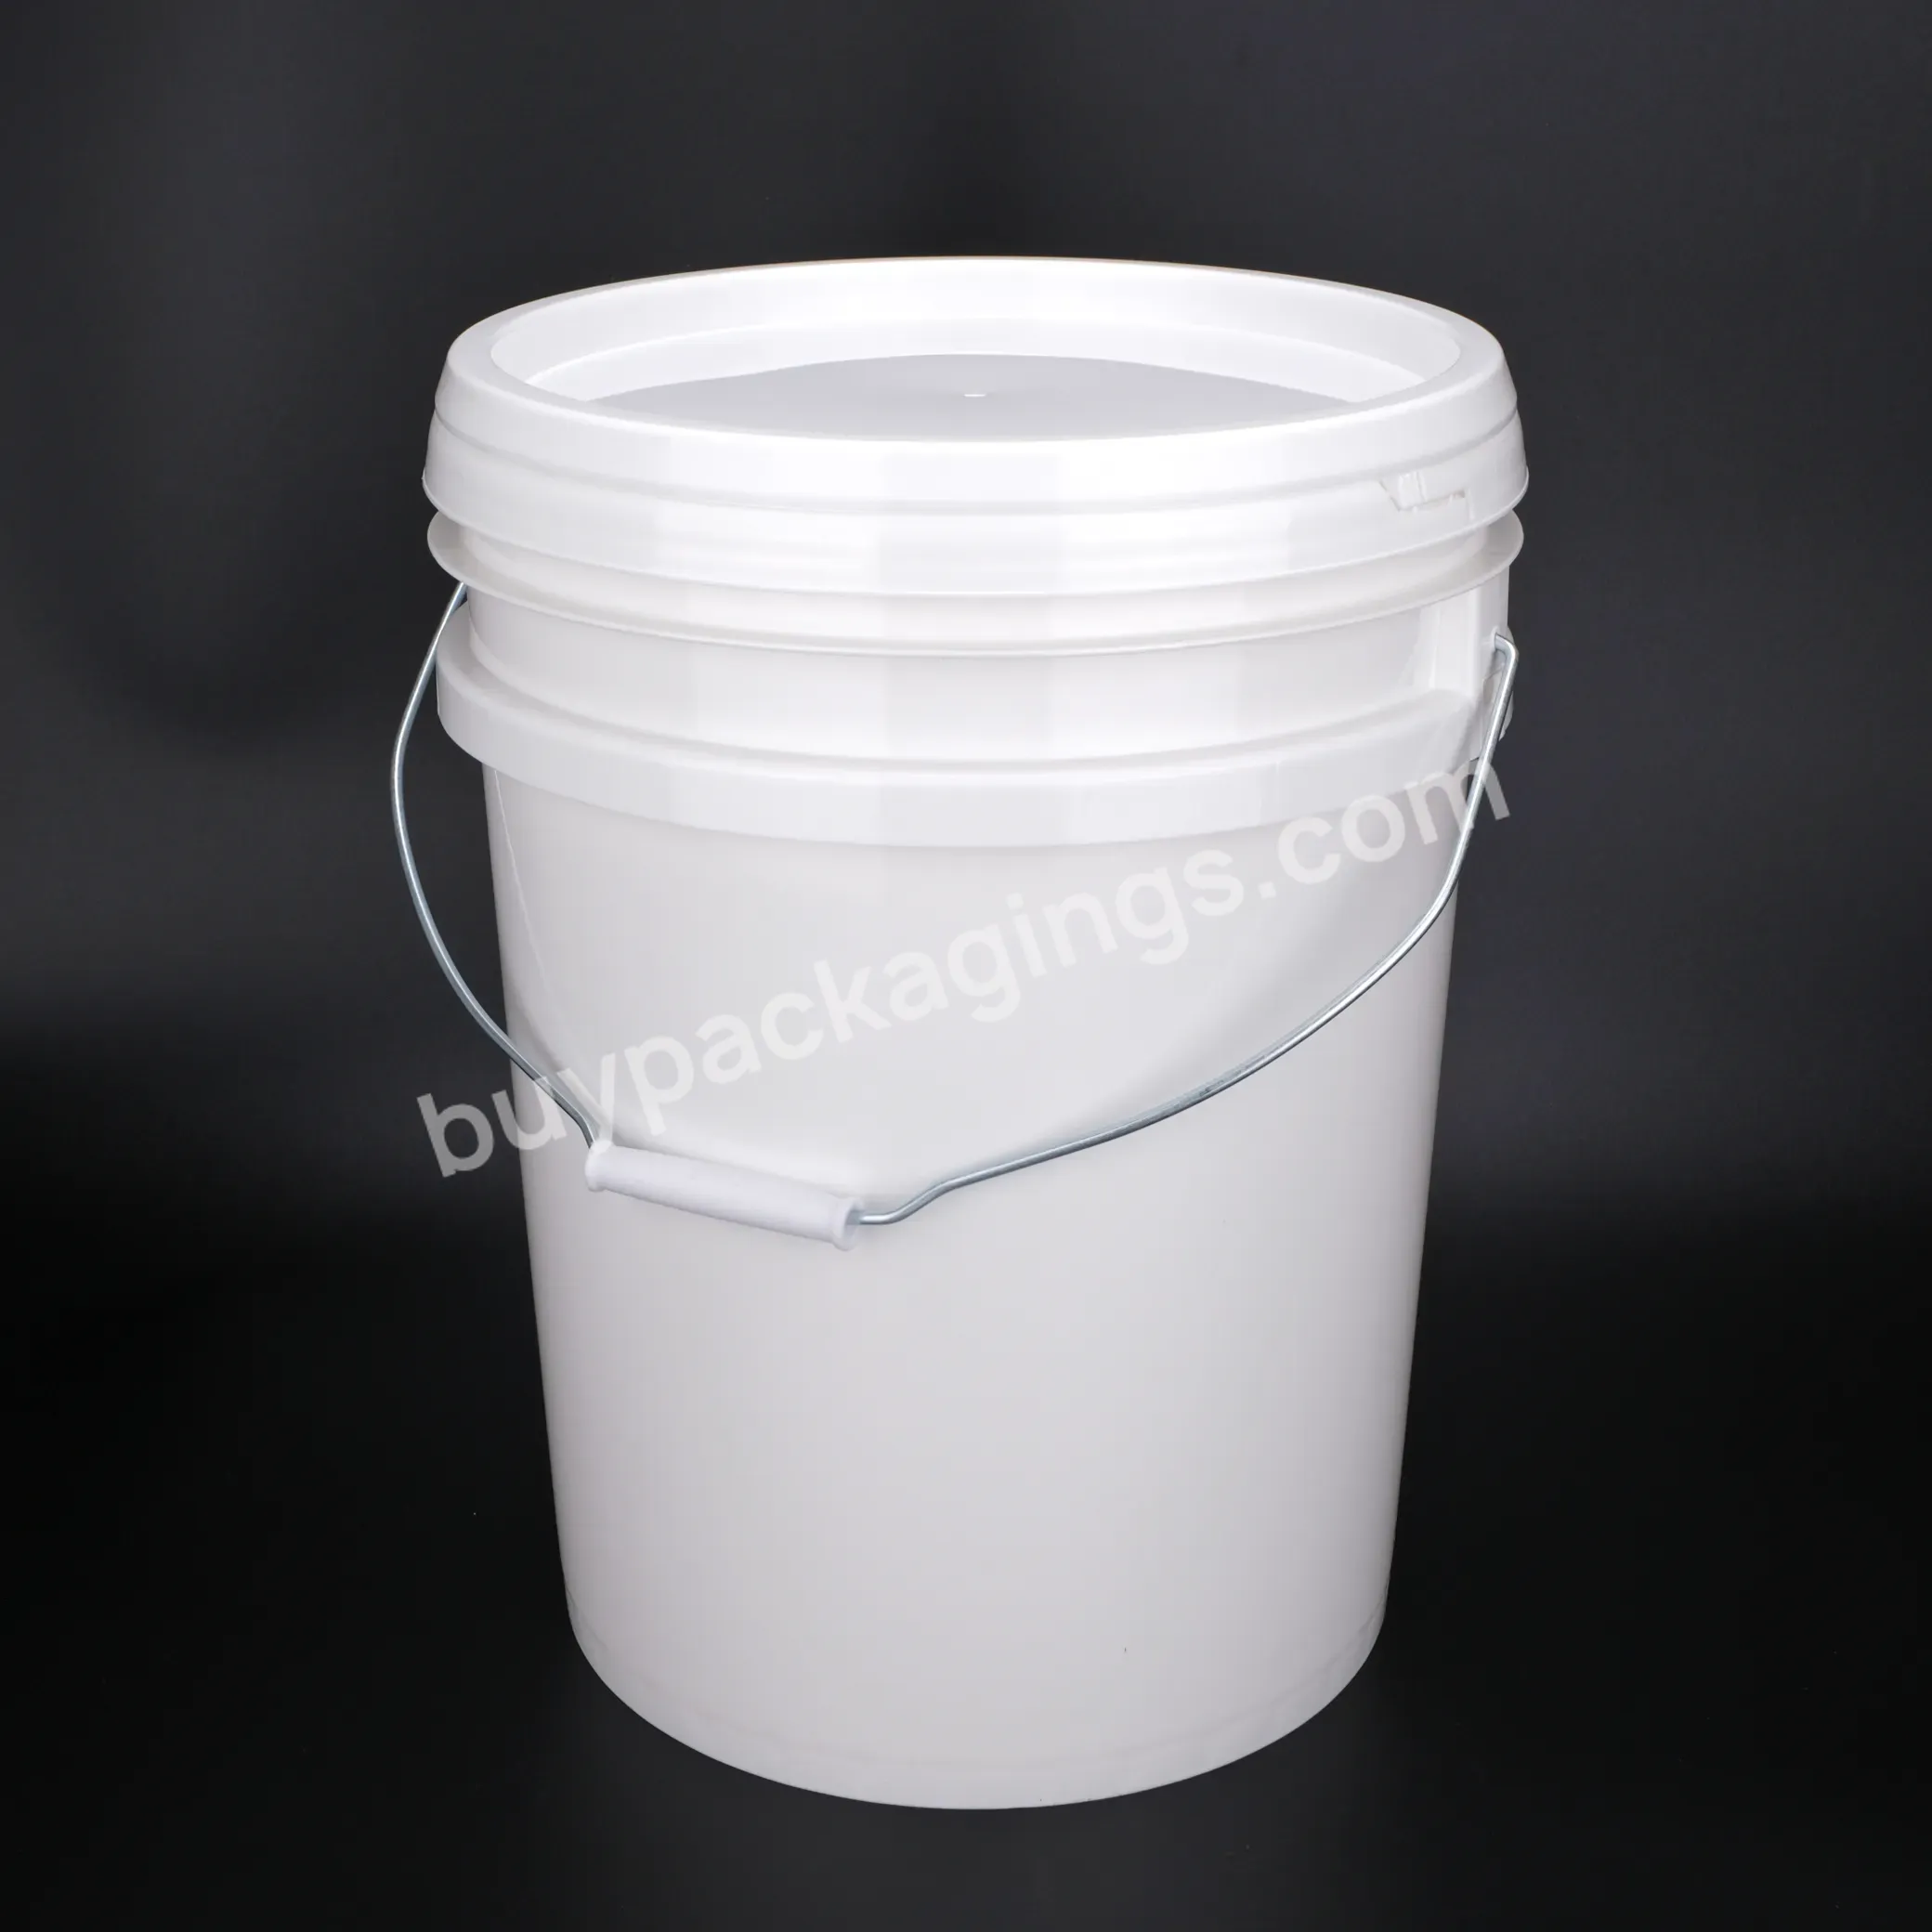 Custom Logo Drums Paint Pails Container 18l Plastic Bucket Crateandbarrel With Lid And Handle - Buy Crateandbarrel,Drums Paint Pails,18l Plastic Bucket.